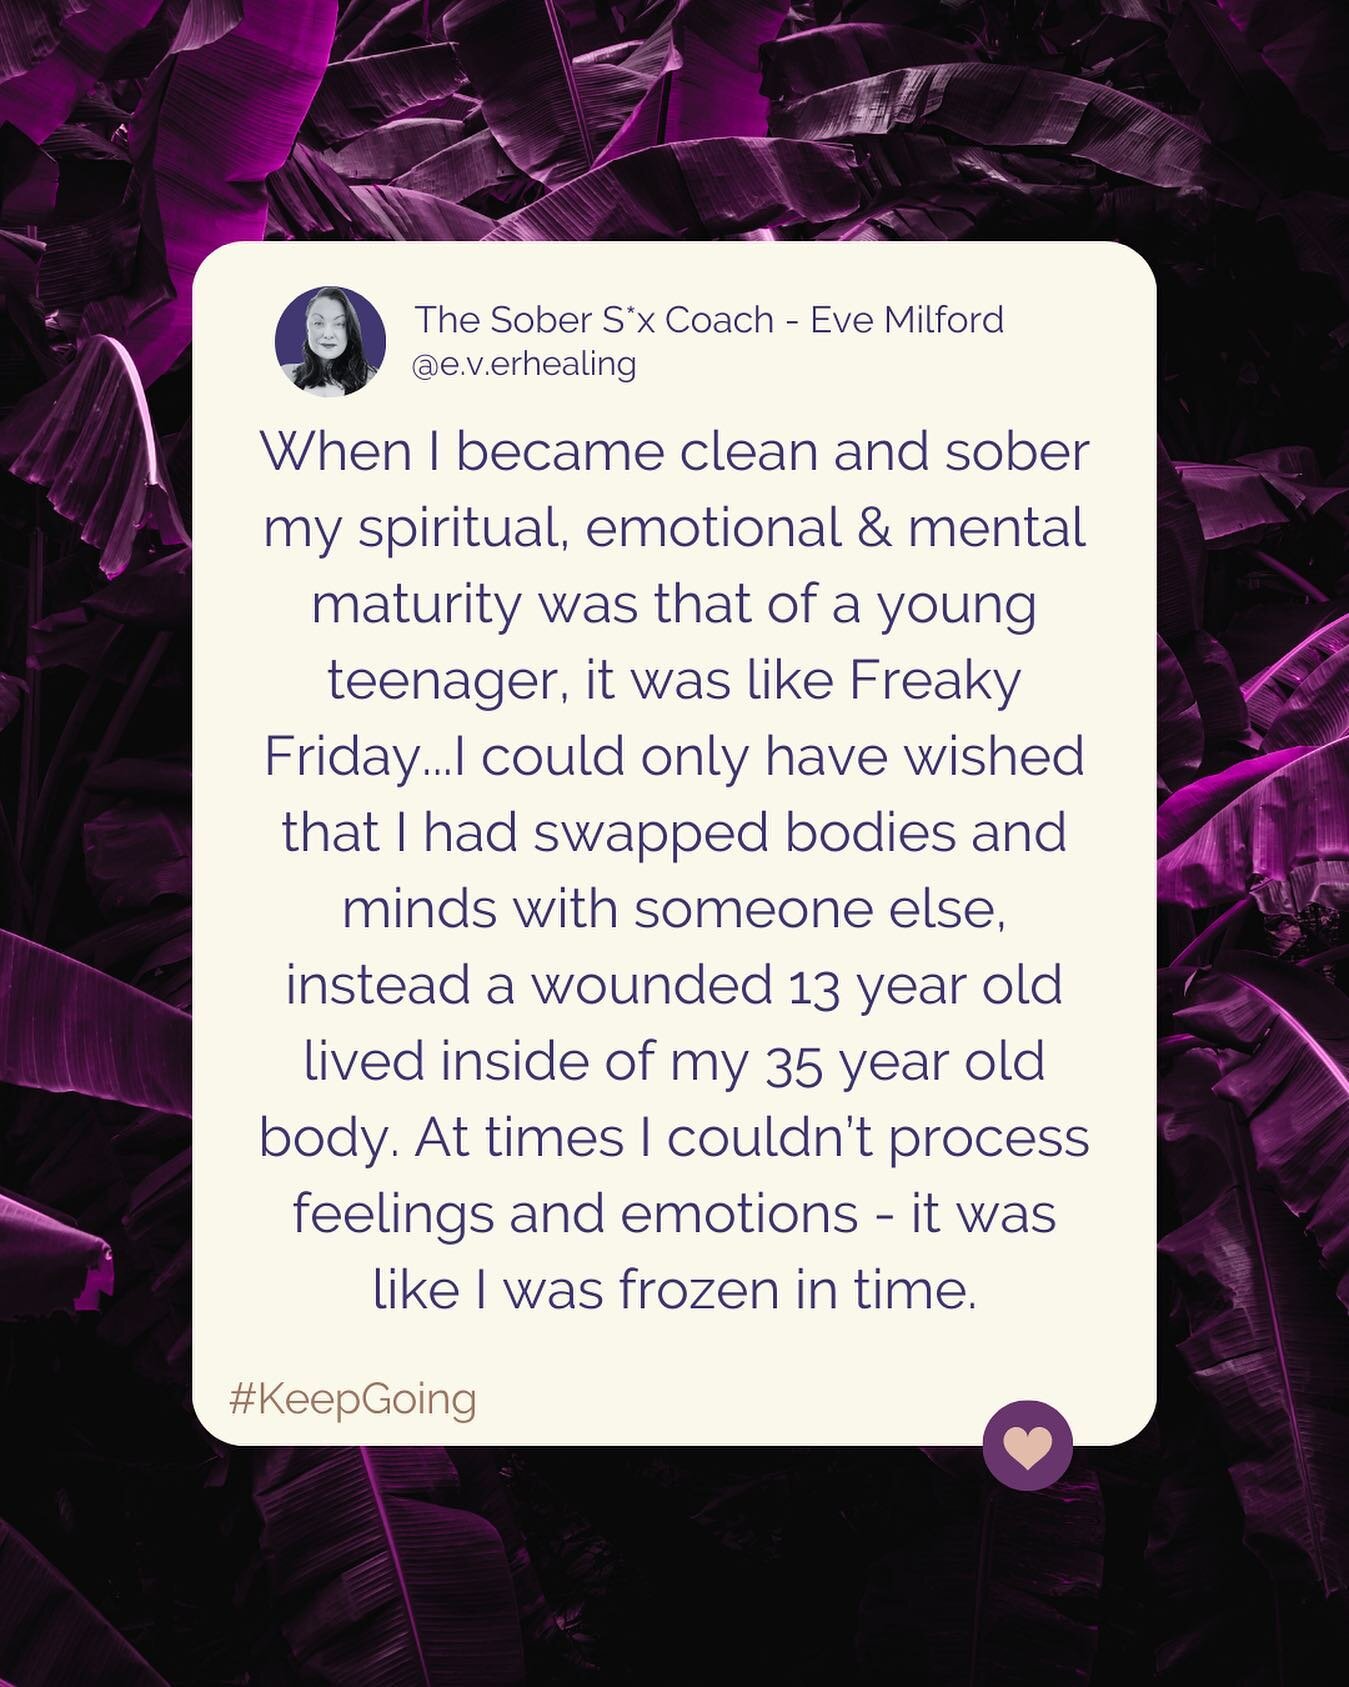 It was obvious to my insides that I would be a candidate for addiction.

I did not want to feel a thing and alcohol and drugs was how I managed to suppress and control my unresolved emotions and feelings. 

I felt like I didn&rsquo;t belong, except f